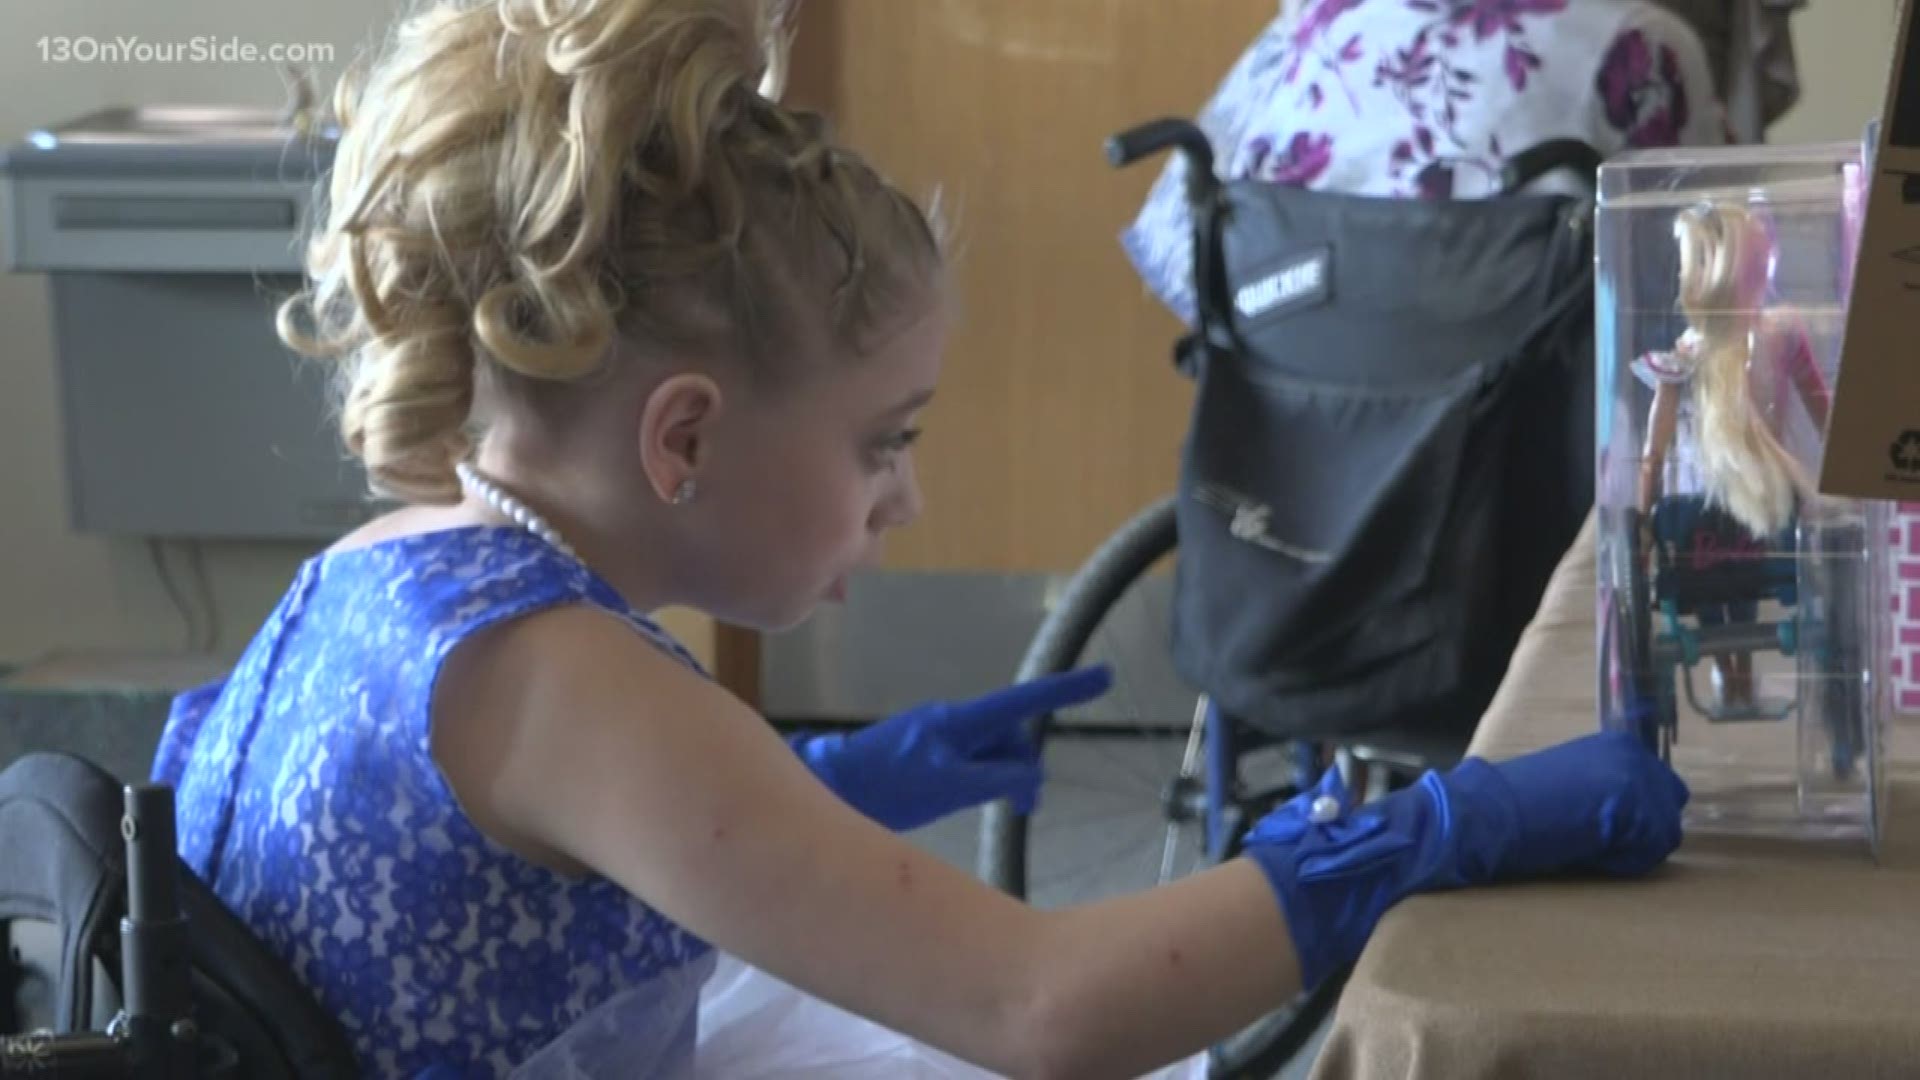 A 10-year-old girl who invented wheelchair body coats was given a special honor on Saturday.